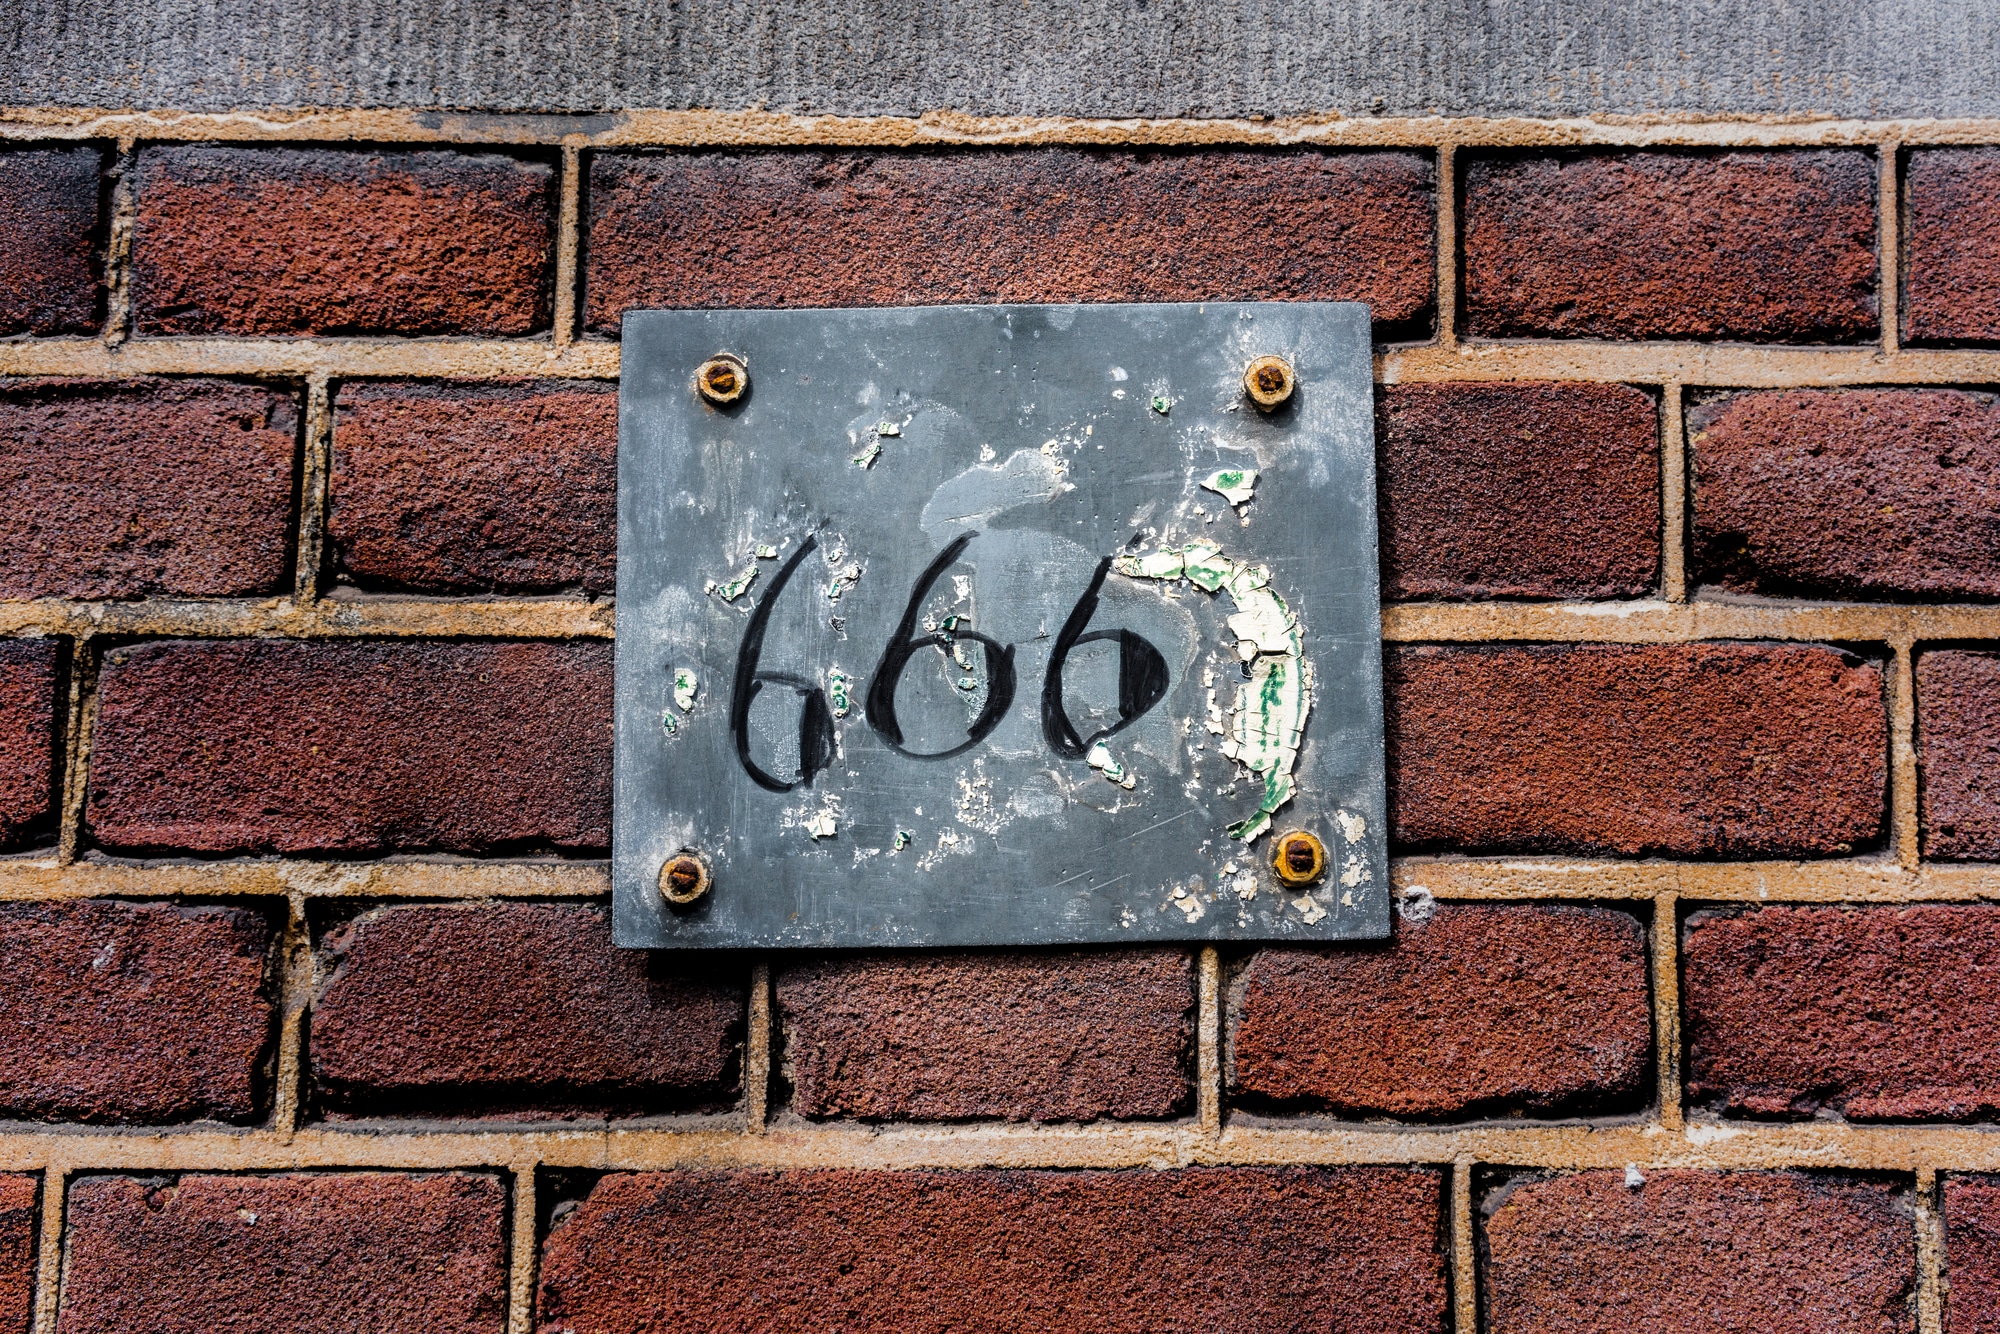 What Does Seeing 666 Repeatedly Mean?